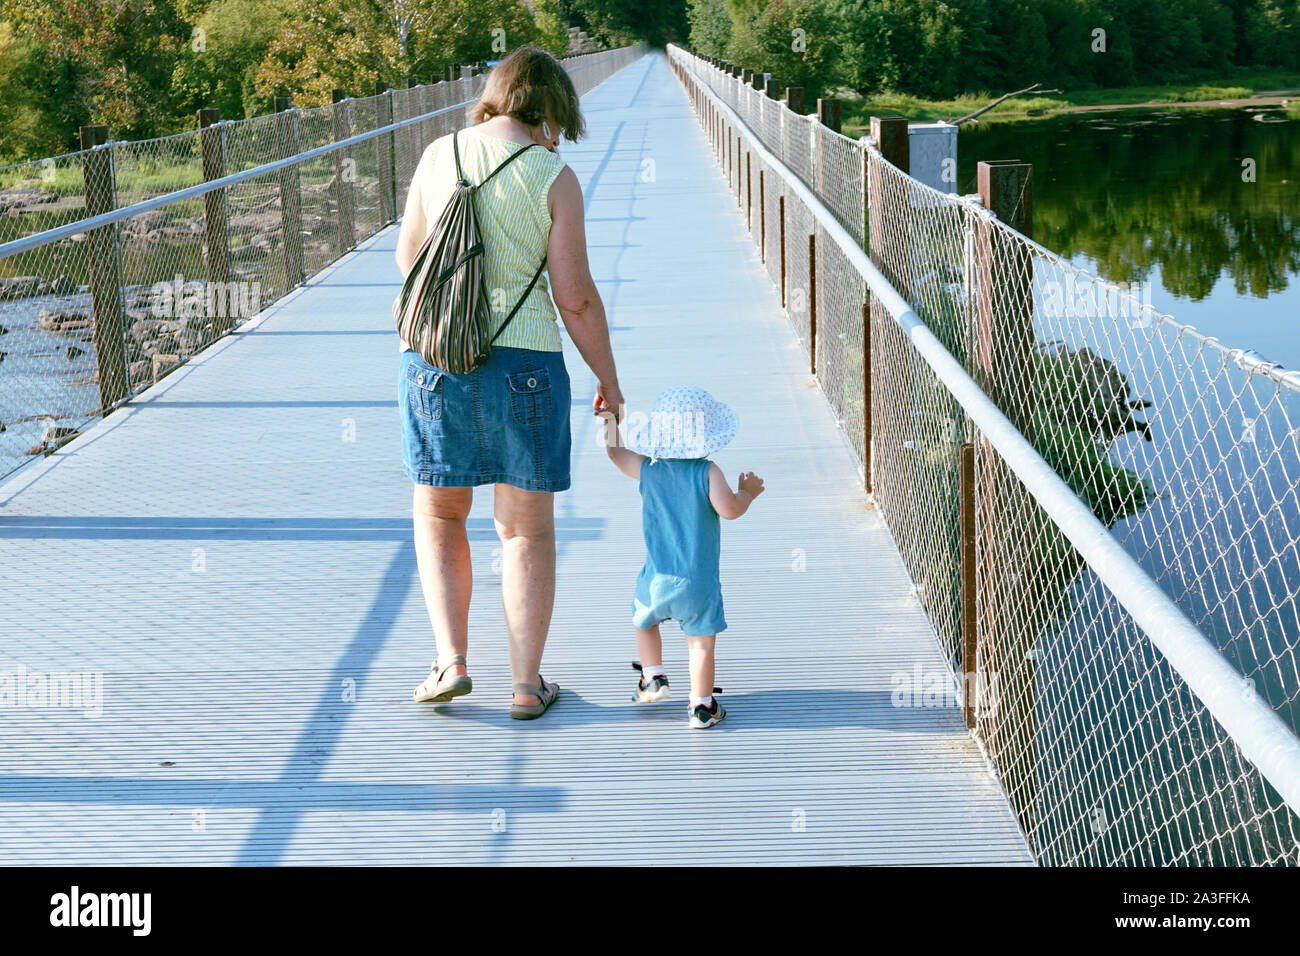 Toddler holding hands and walking with grandmother on a bridge over a river Stock Photo